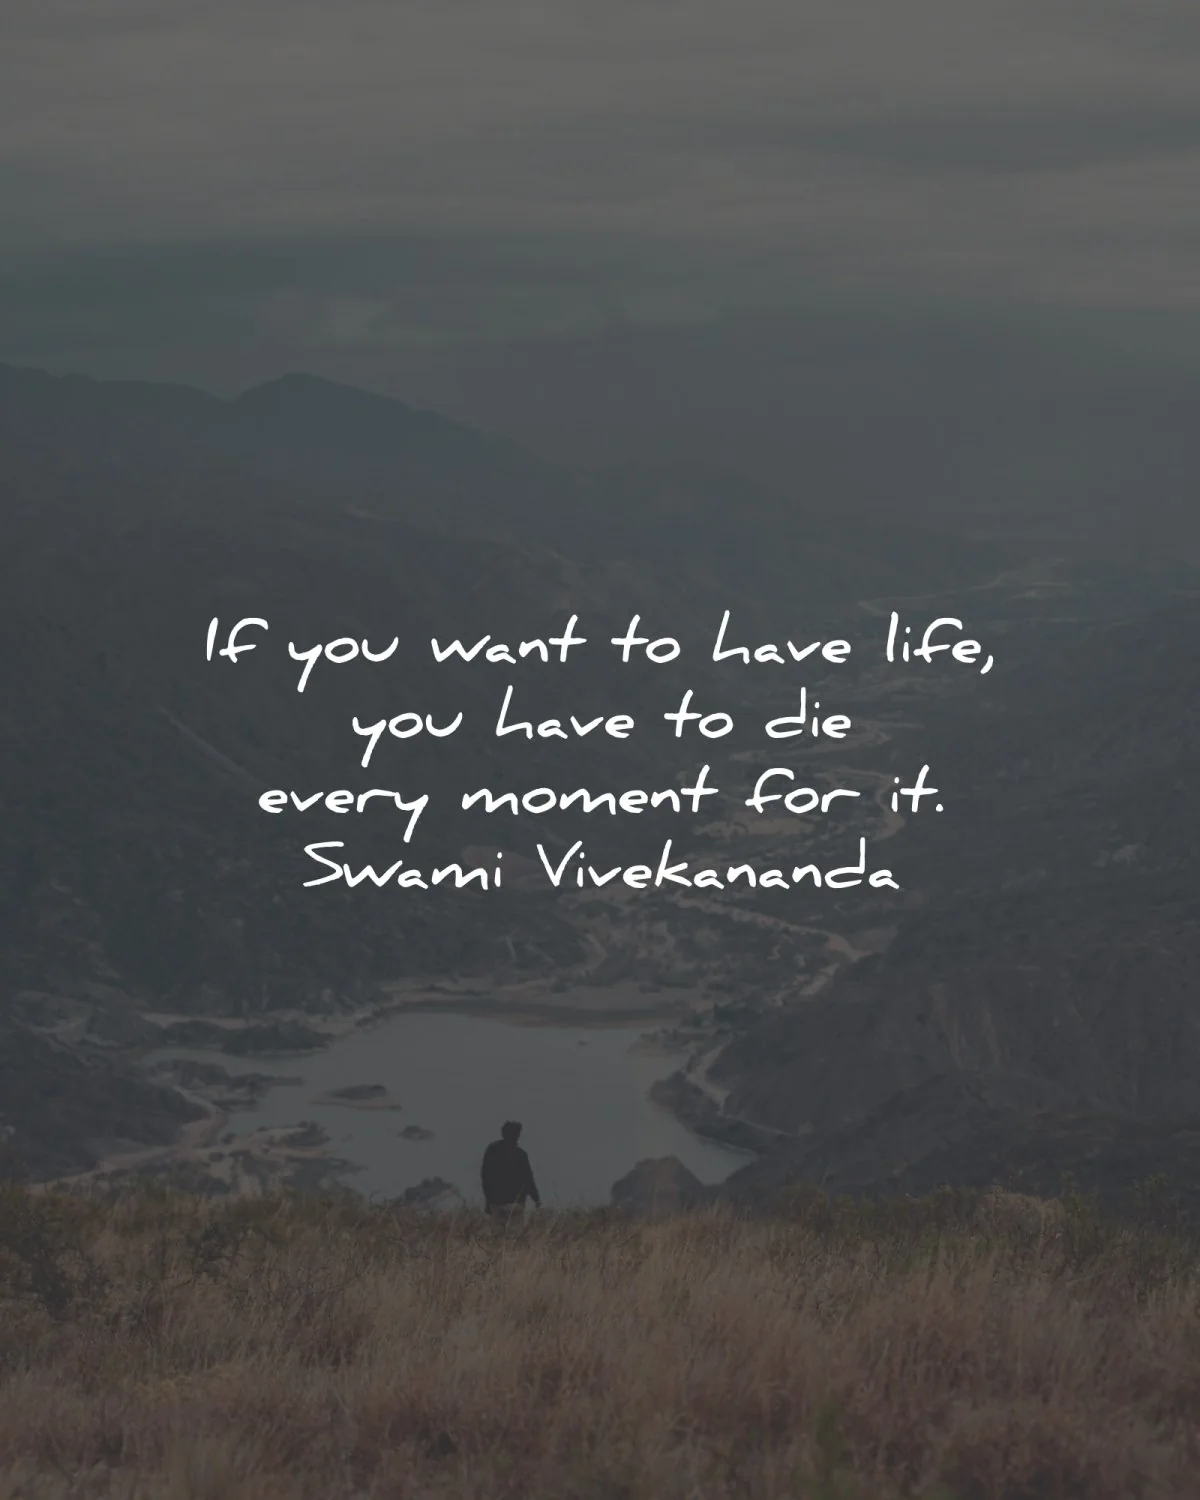 swami vivekananda quotes want have life die moment wisdom